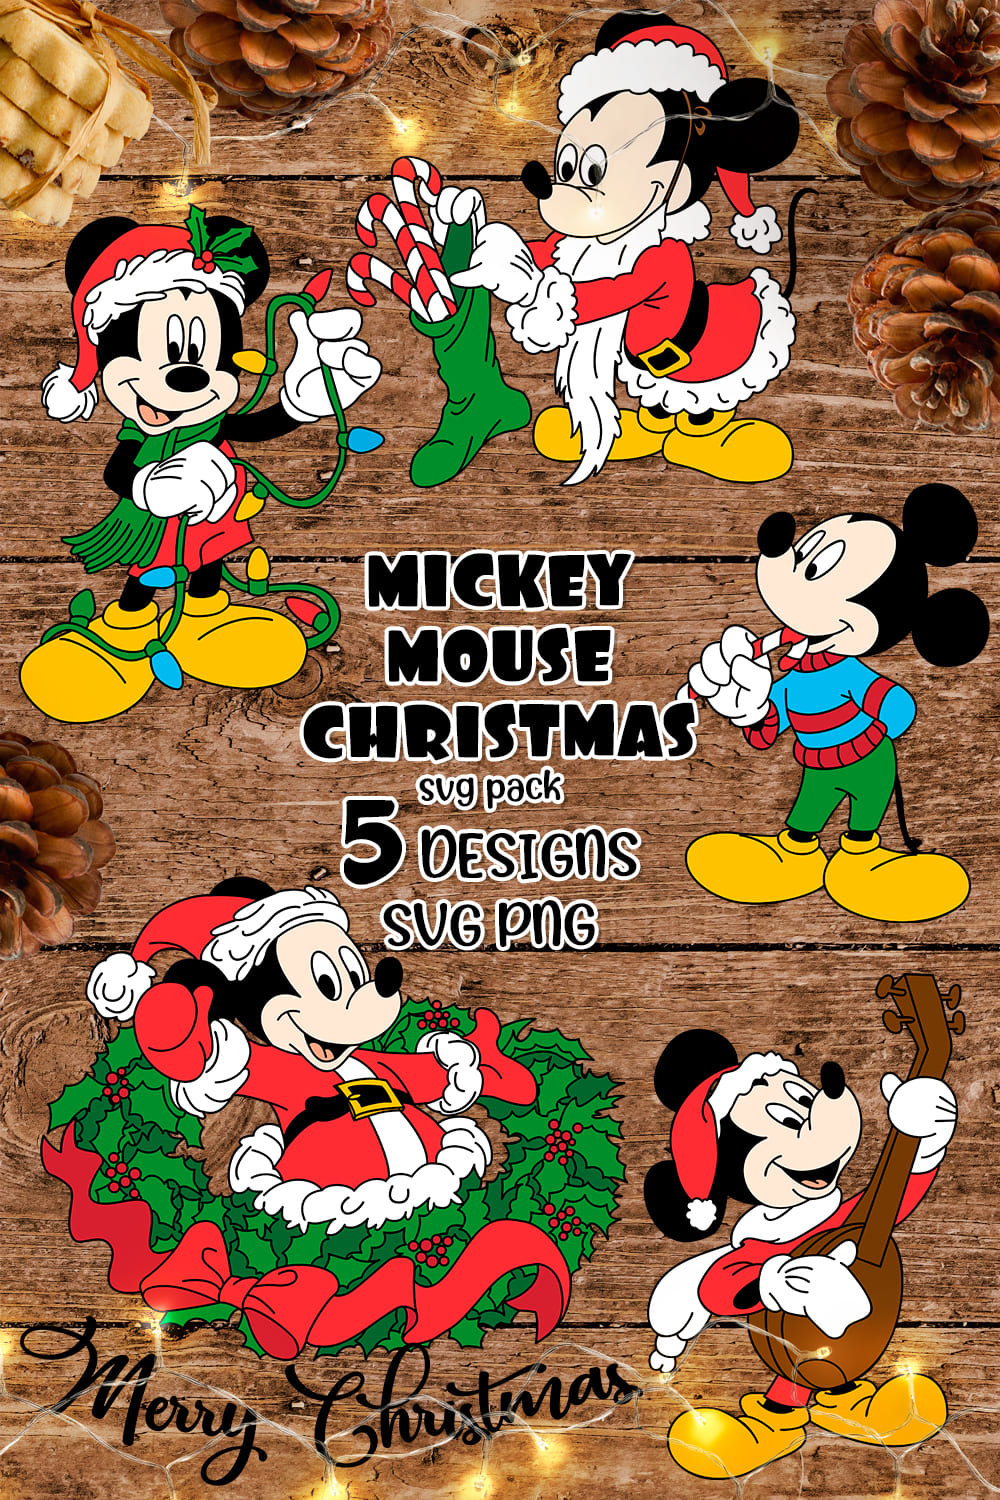 Mickey Mouse Christmas SVG - pinterest image preview.